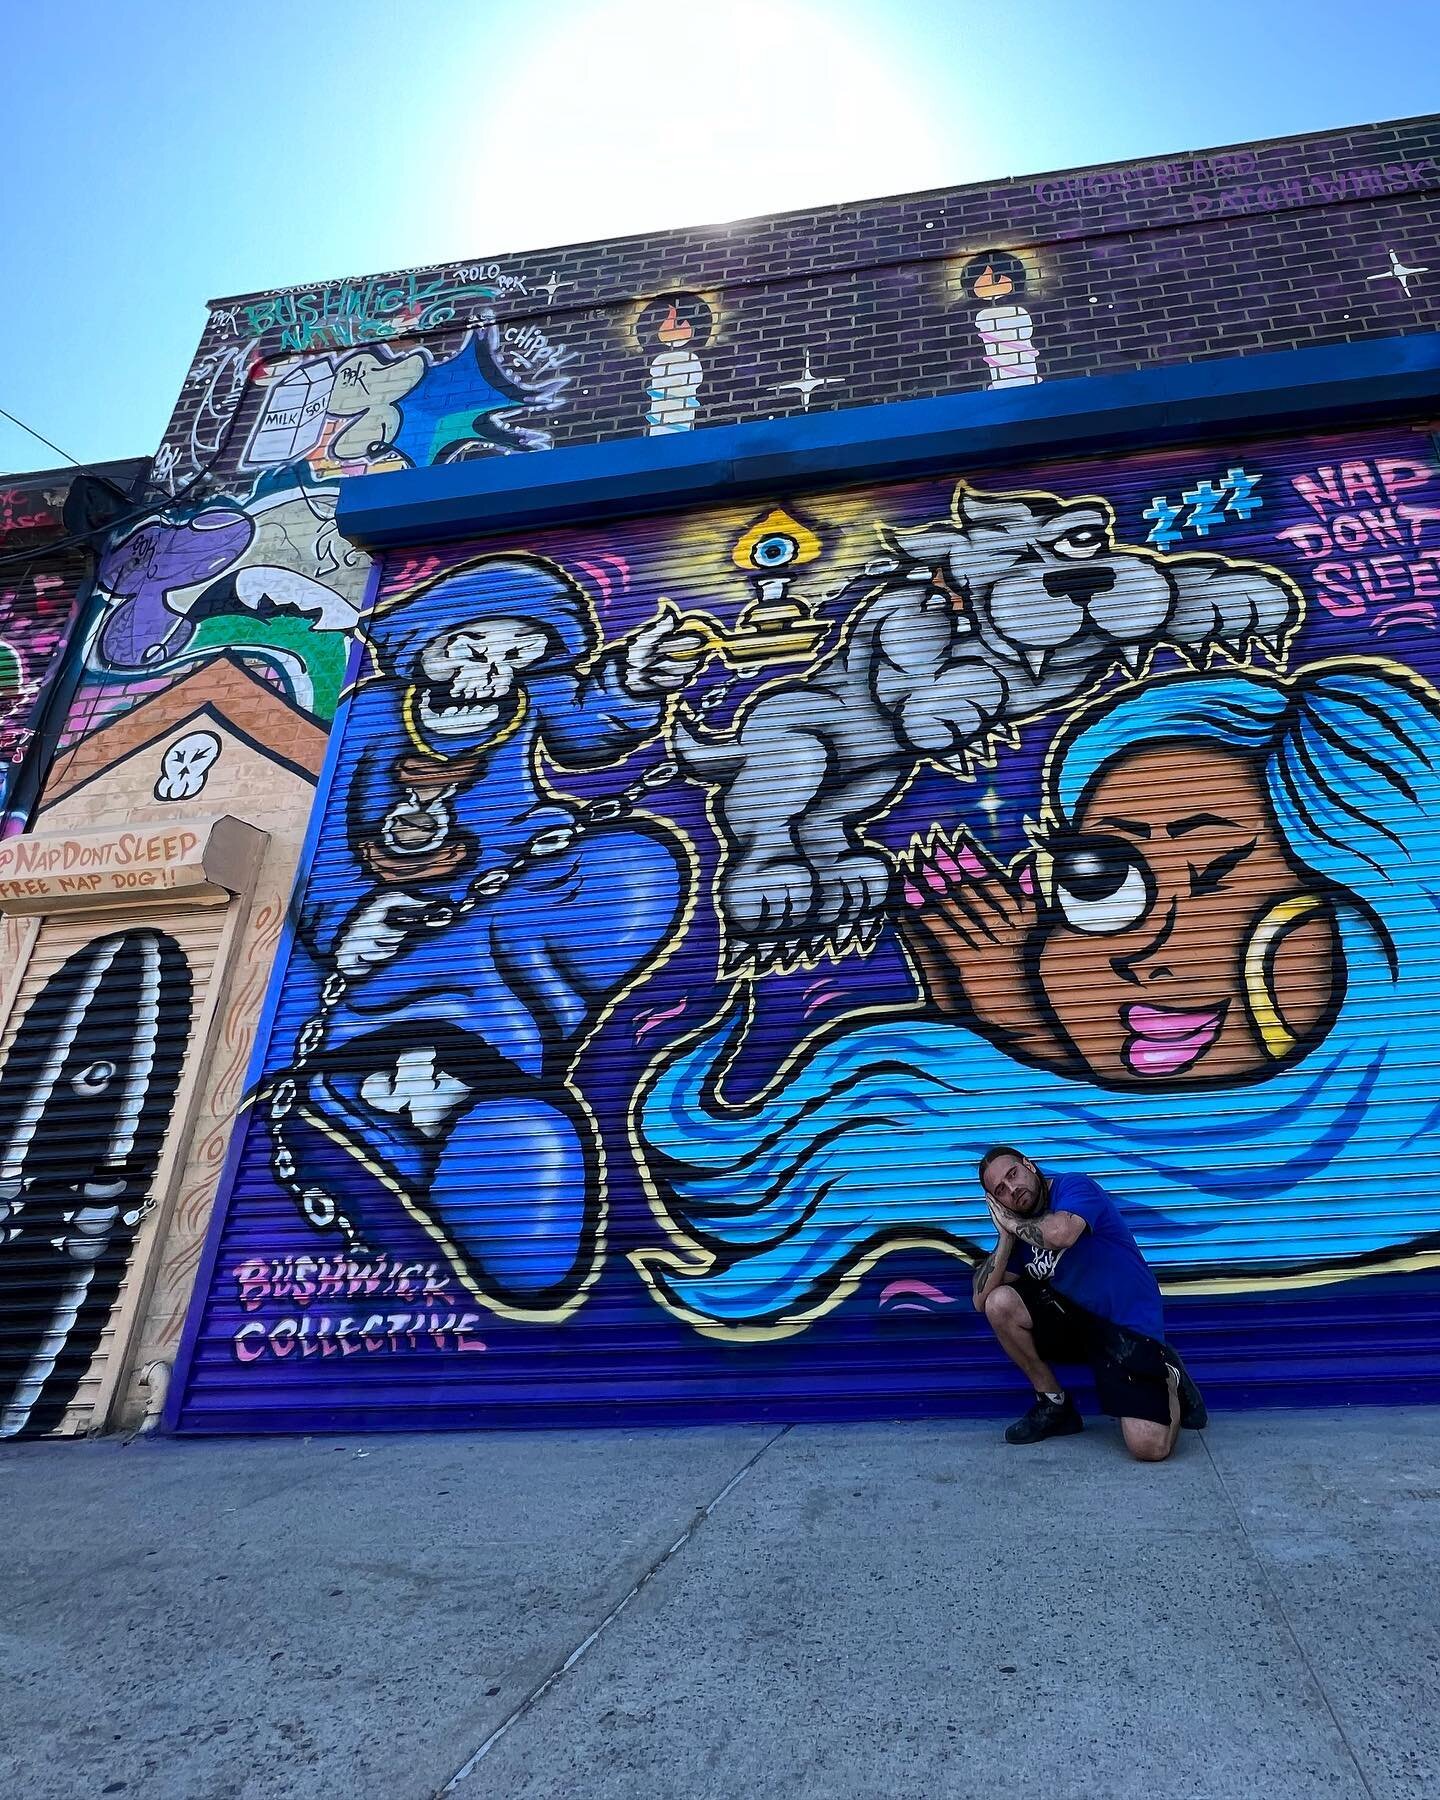 Just finished painting this @napdontsleep mural for @thebushwickcollective. Thanks to Joe for the alley oop, @wsupwitbruh for the assistance &amp; Rosie 🐶 for the morale. Now come pull up to the block party today!